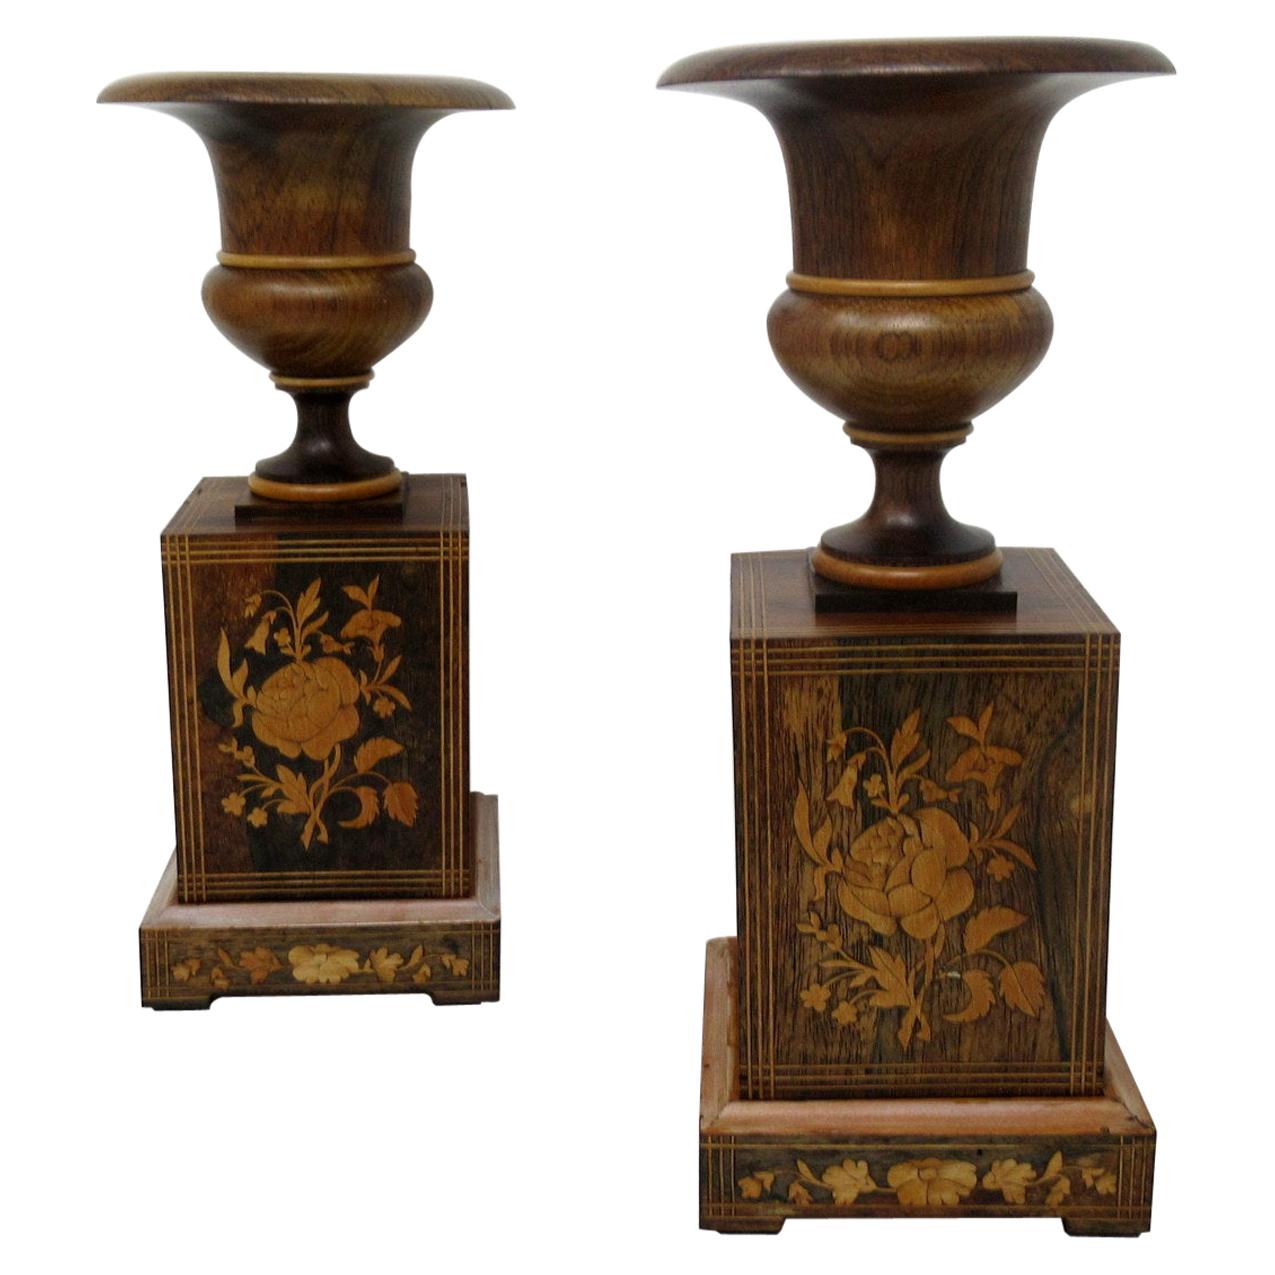 Antique Vintage Pair Wooden Treen Carved Rosewood Candlesticks Urns Mid Century